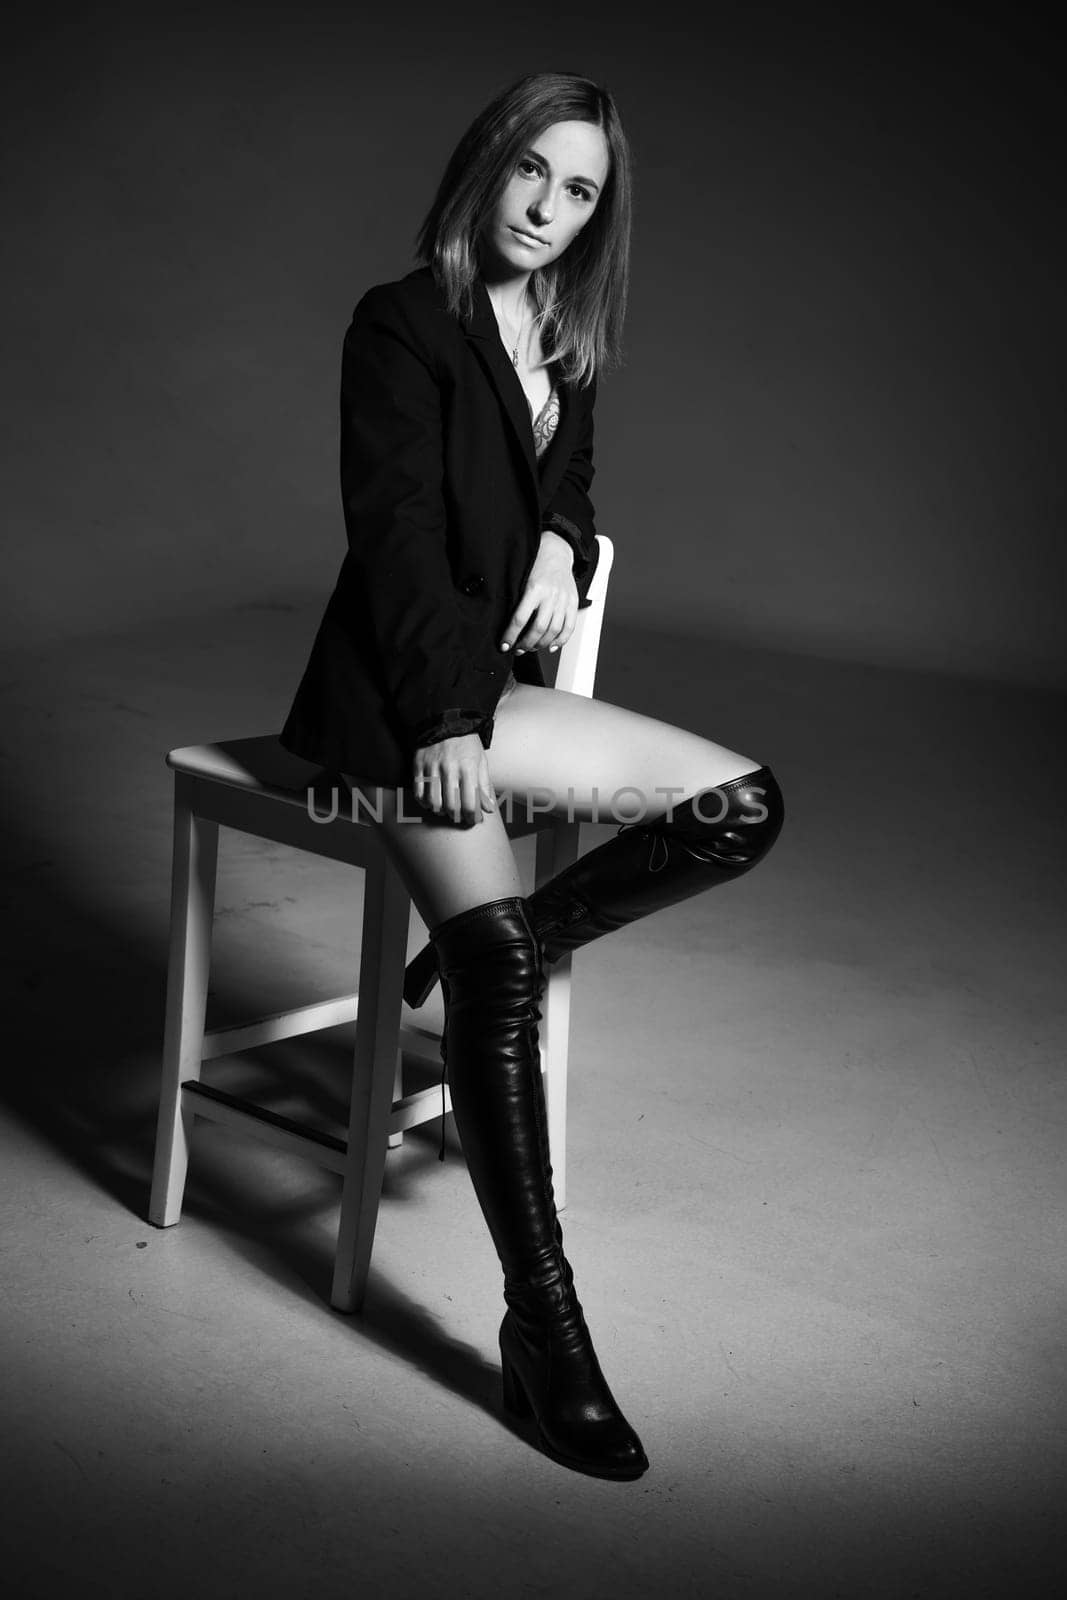 beautiful woman of Caucasian ethnicity posing sitting on a chair in a black jacket and lingerie, black and white photo. Dark photo of seductive sexy girl